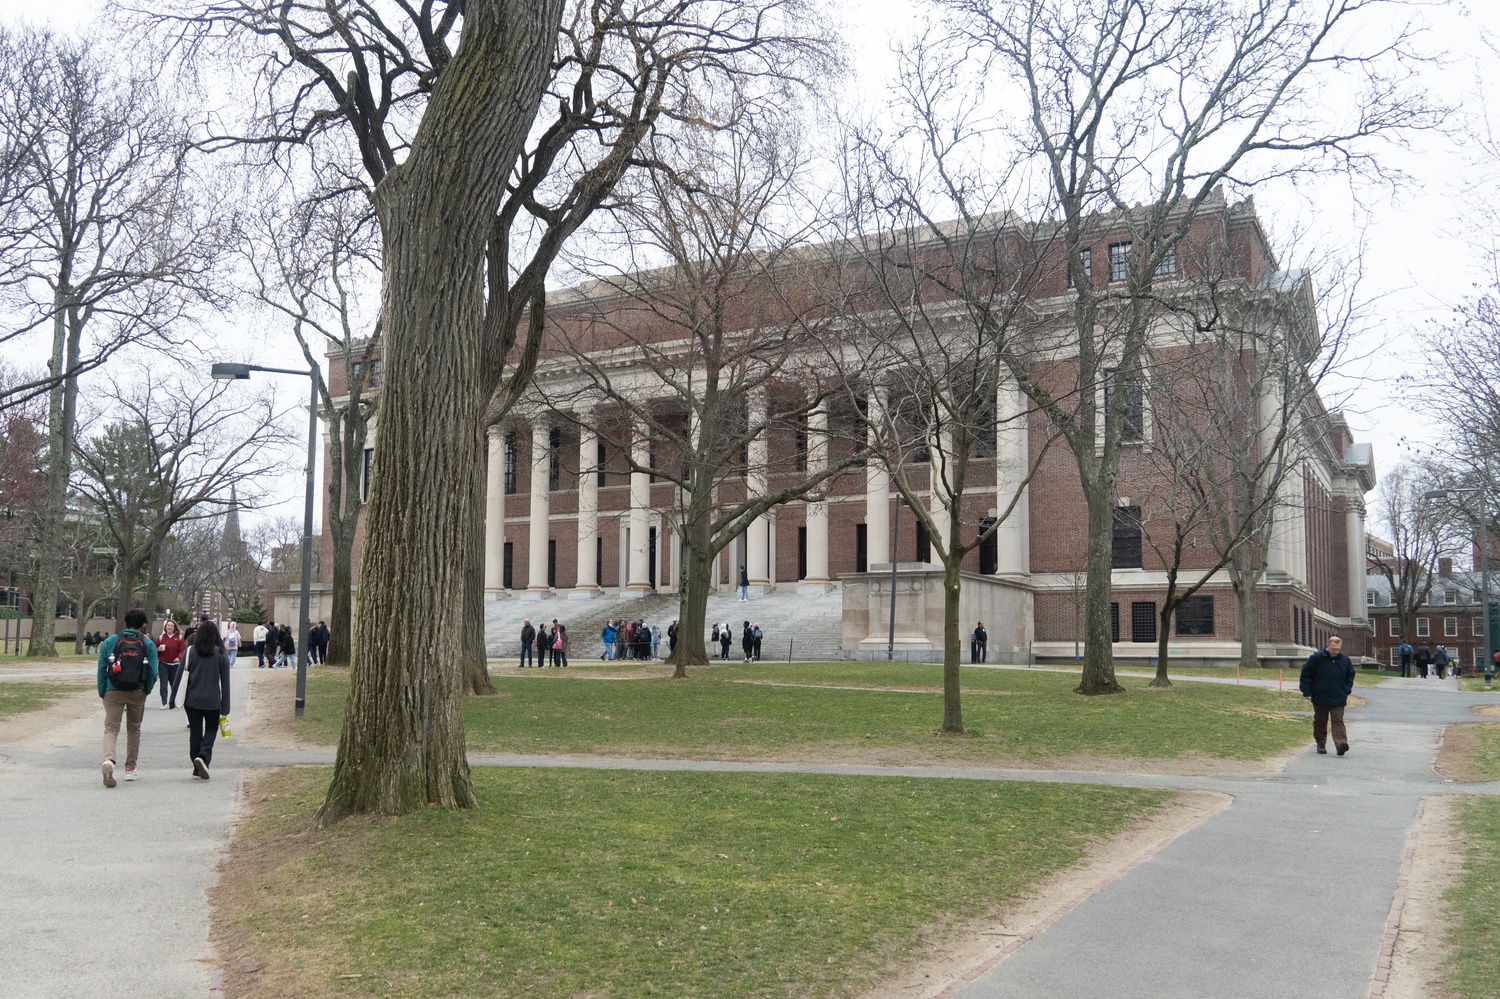 Widener Library is the centerpiece of Harvard's library system.